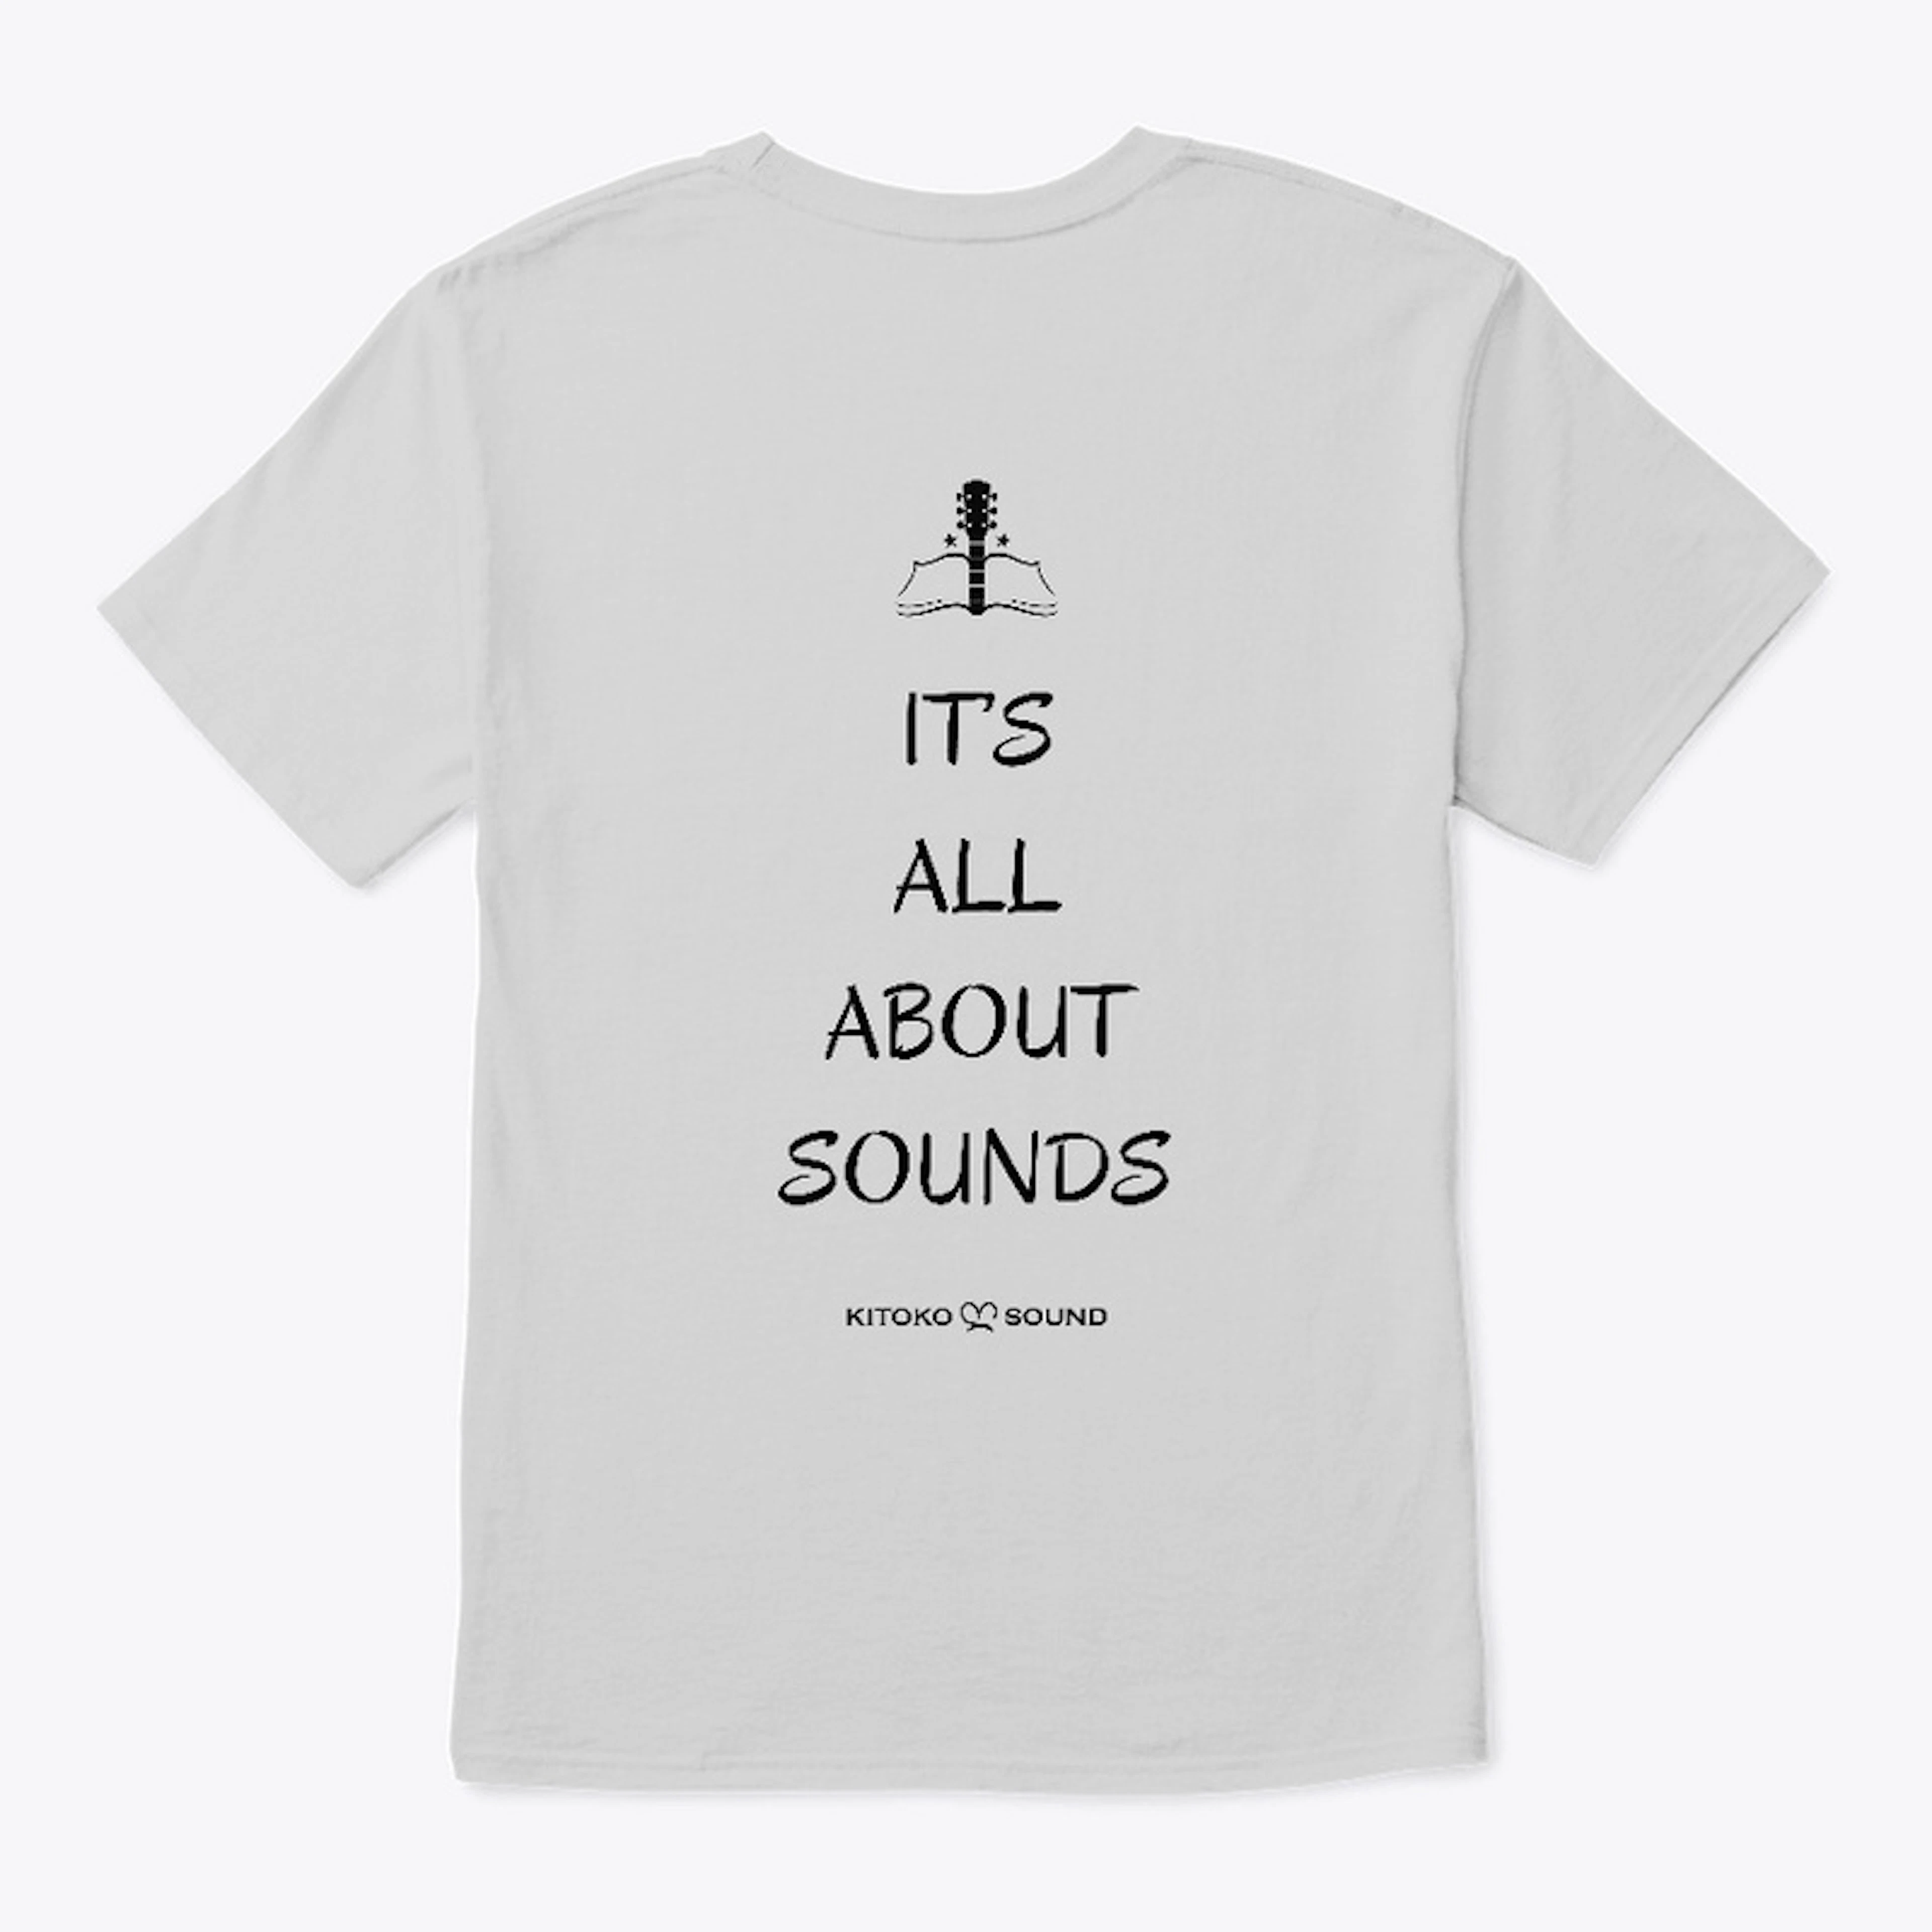 It's All About Sounds